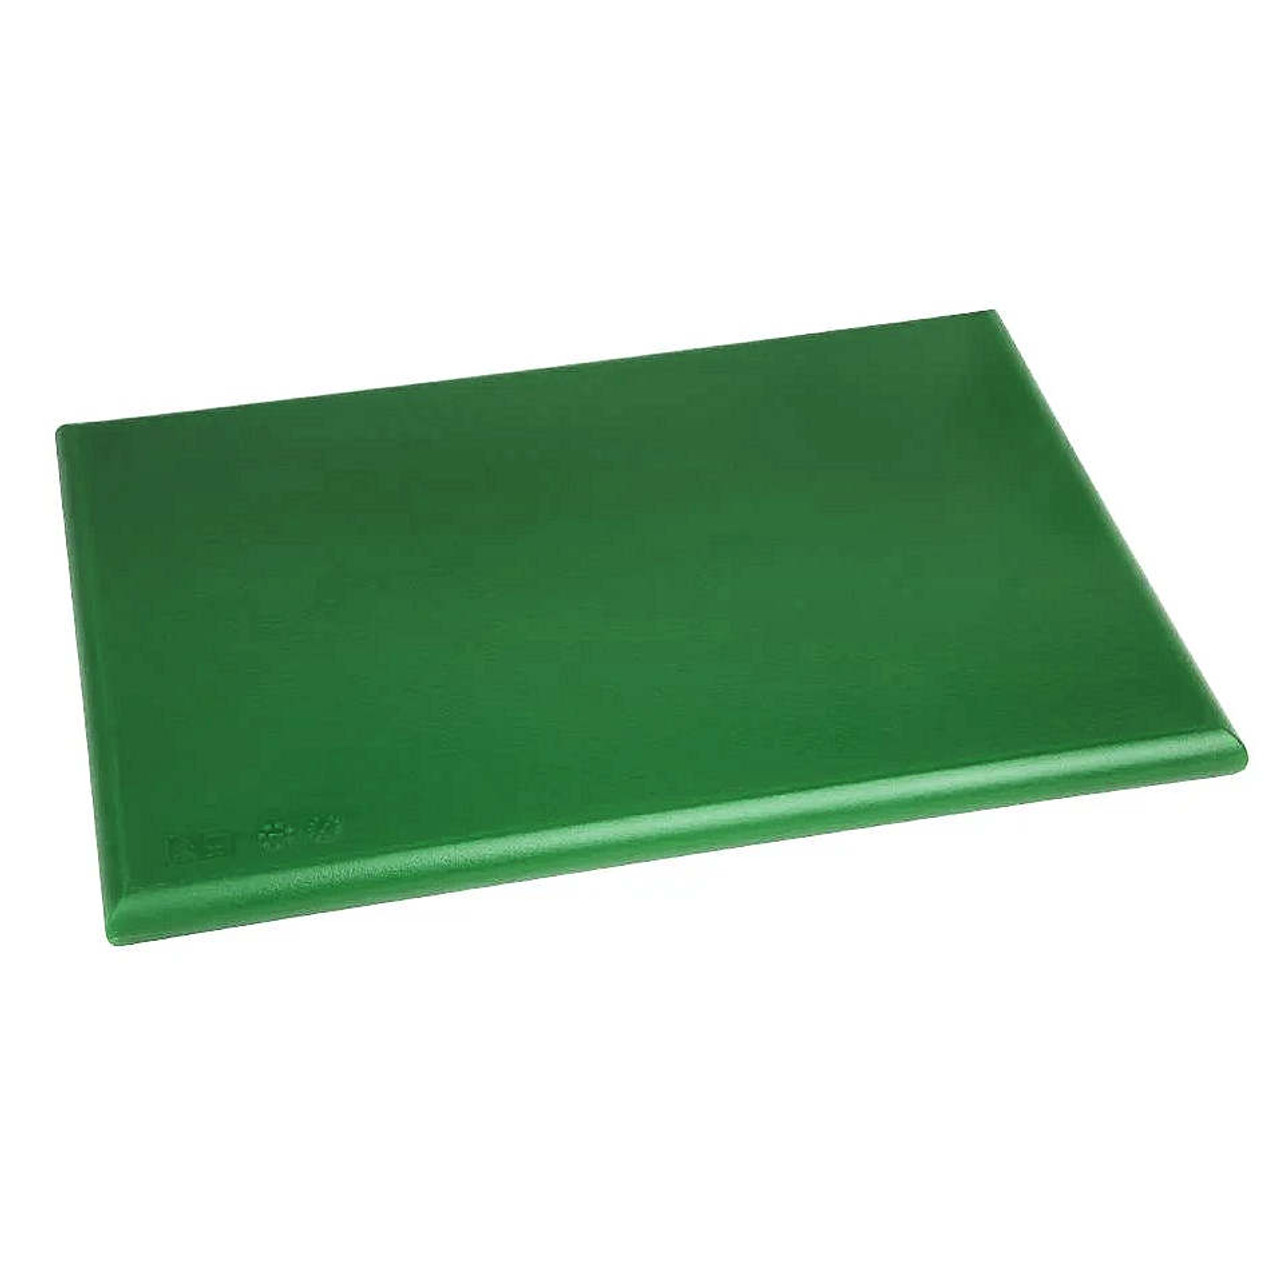 CHOPPING board Extra Thick Green 12" x 18" x 1"